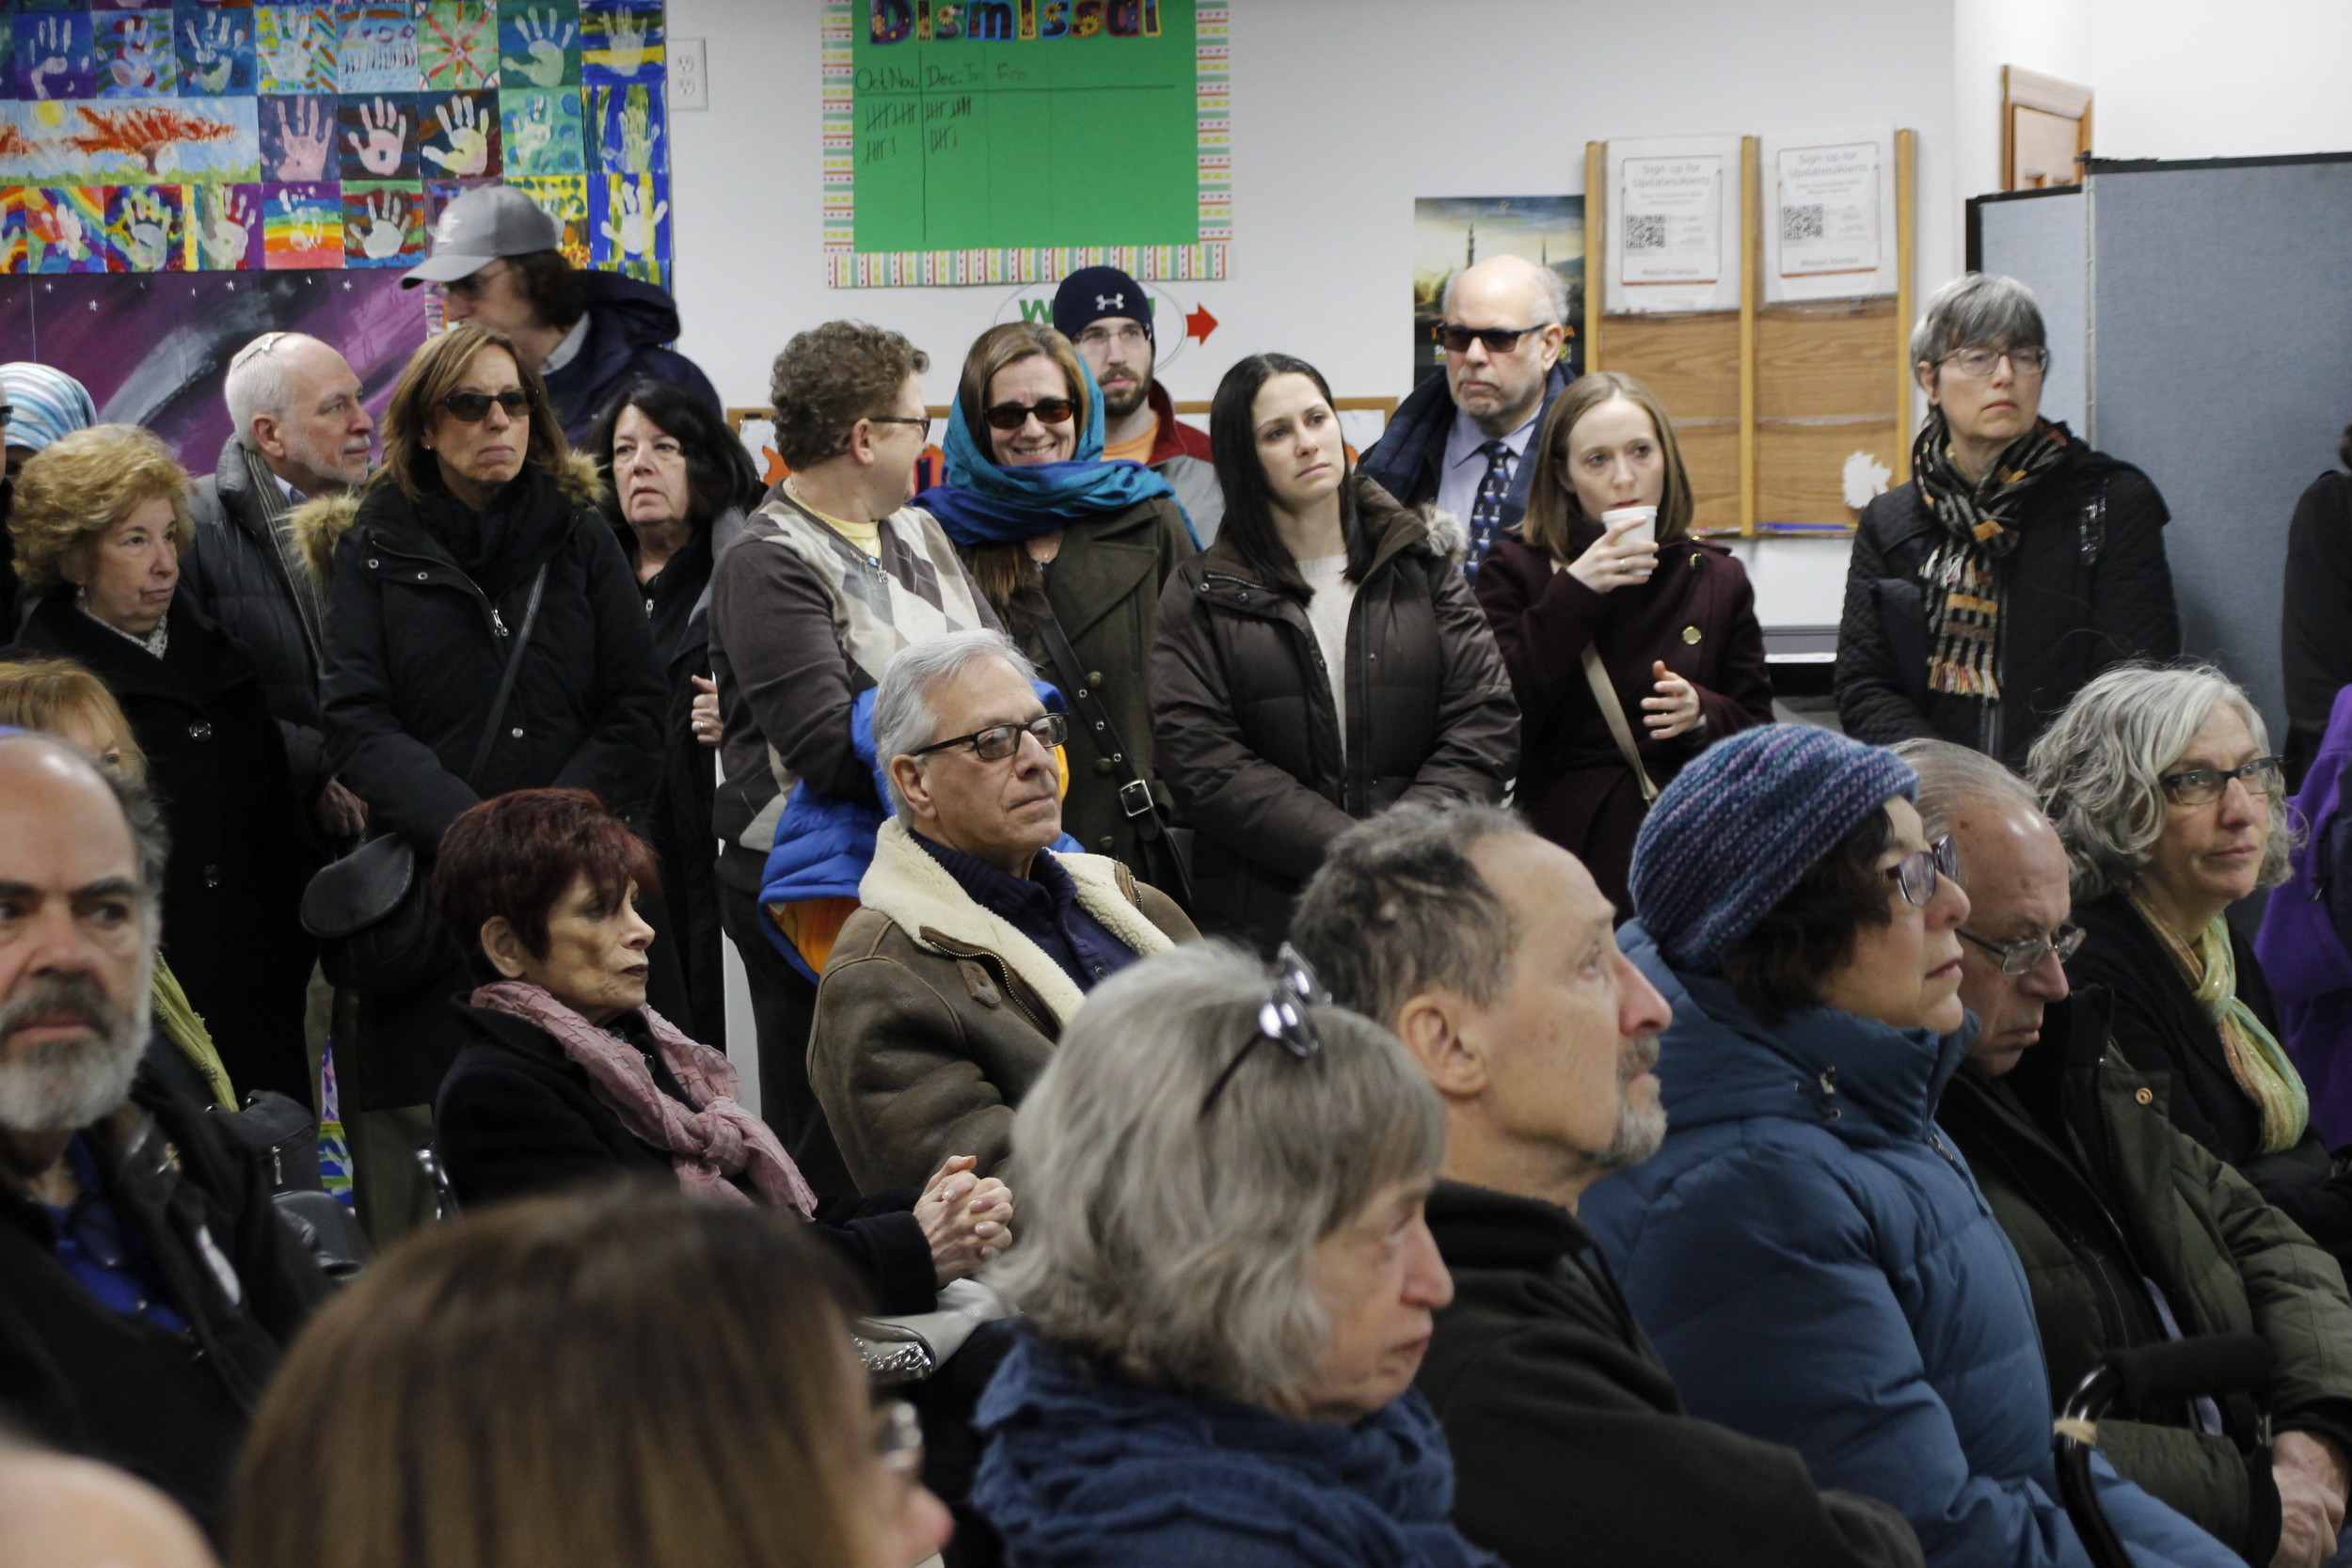 It was standing room only at Masjid Hamza Islamic Center of South Shore on Feb. 3.